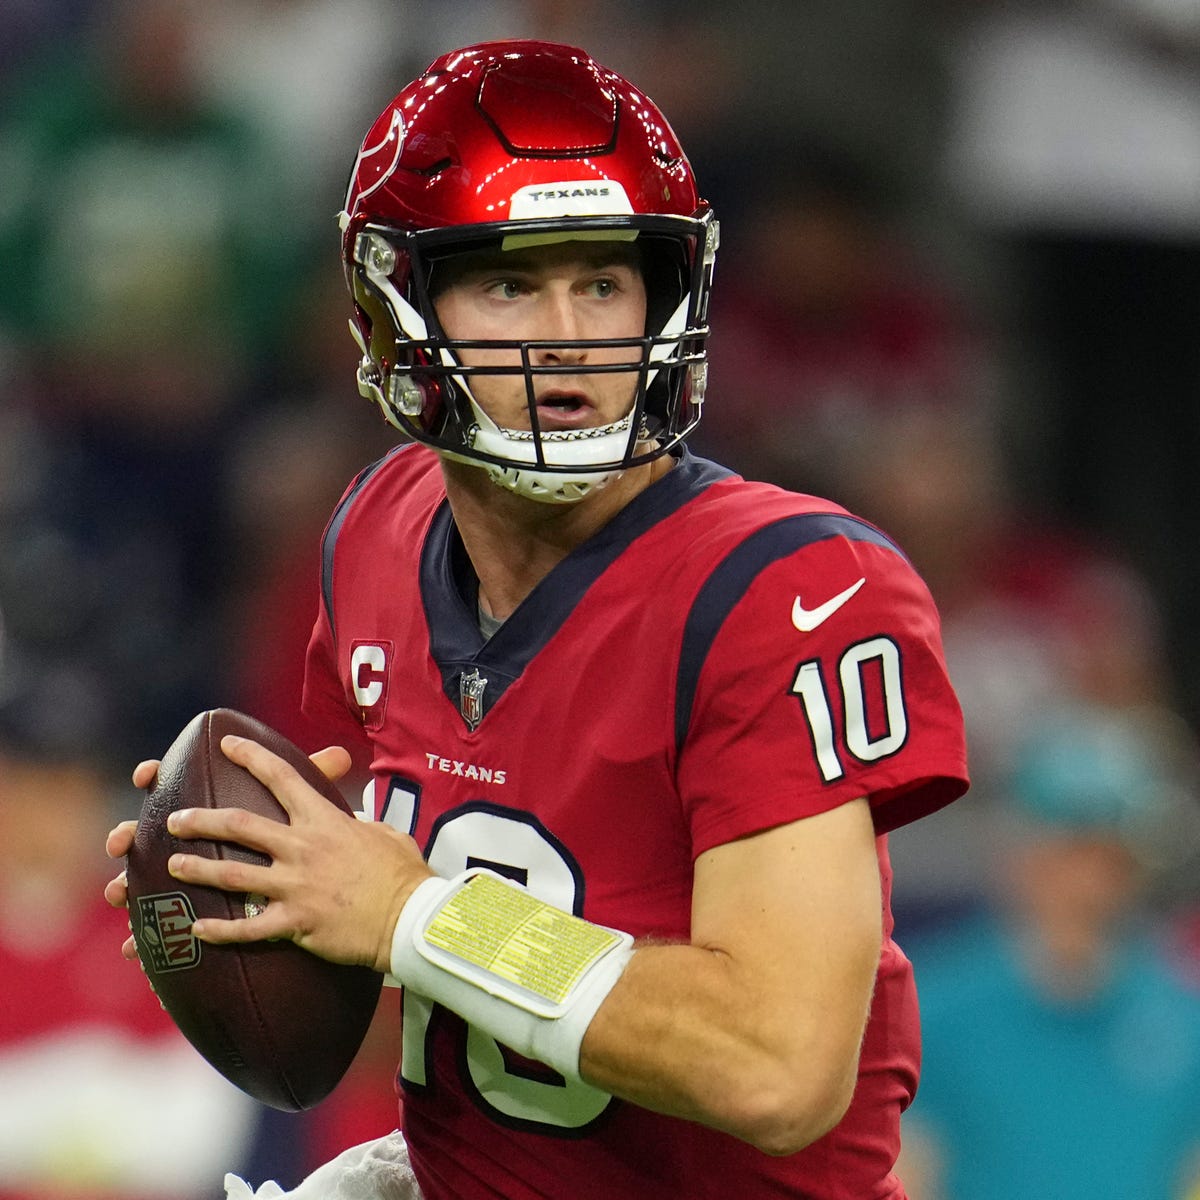 Watch Texans Game: How to Stream Today's NFL Week 10 Game - CNET